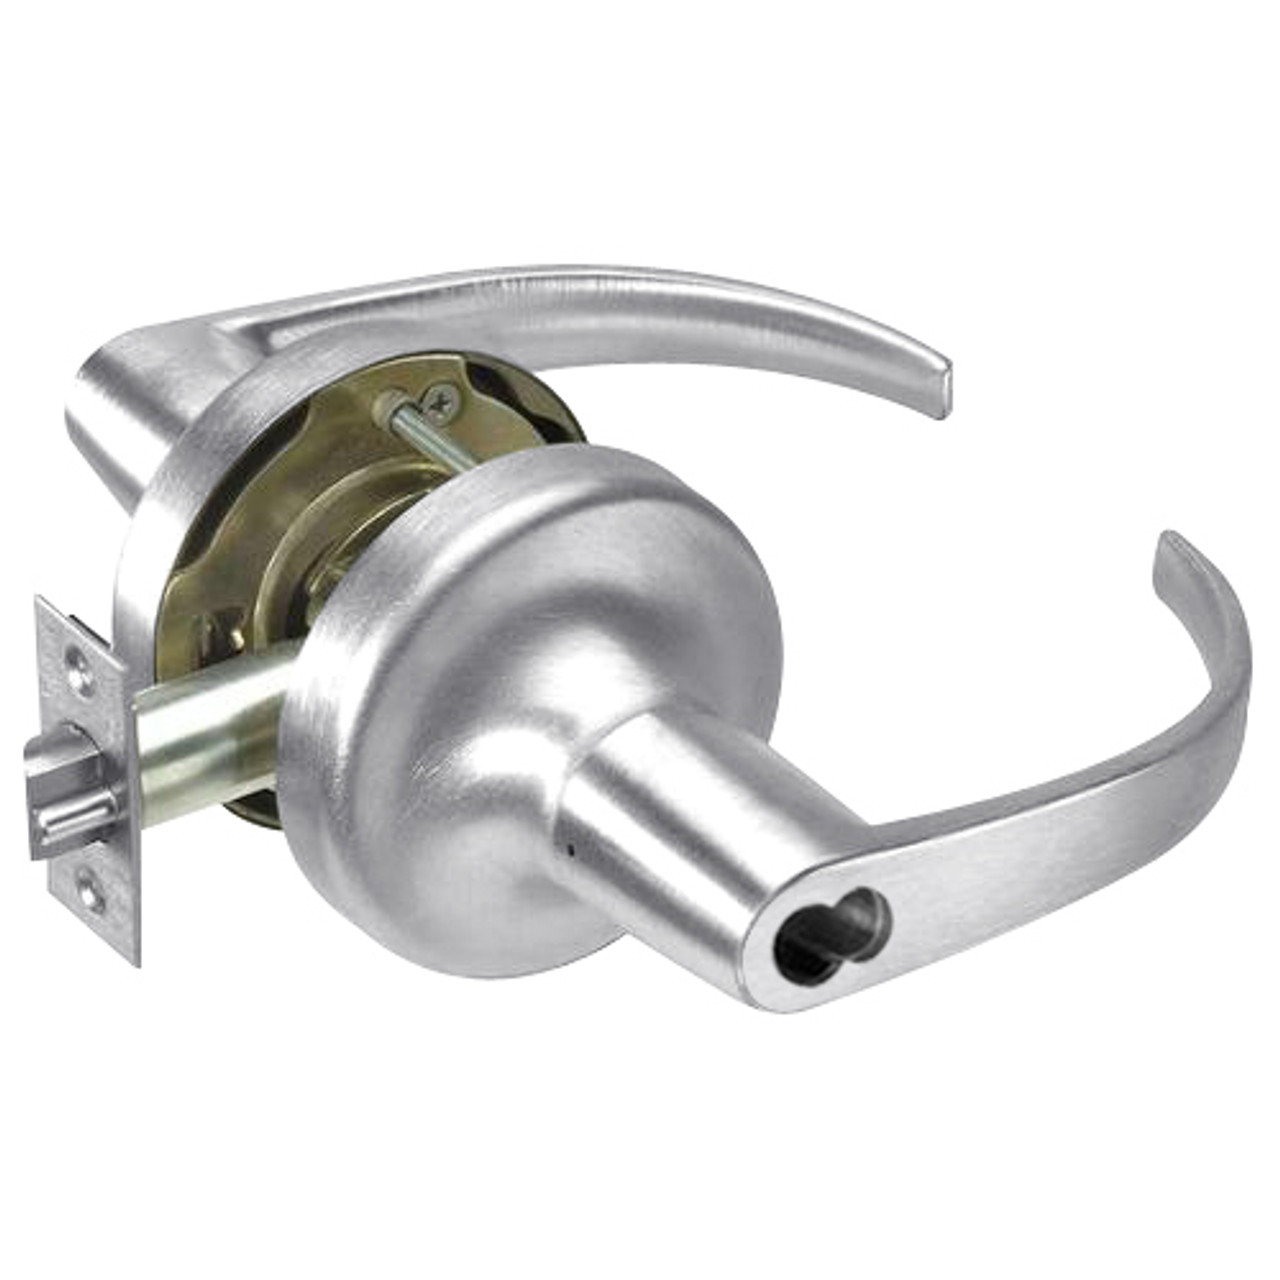 B-PB5322LN-625 Yale 5300LN Series Single Cylinder Corridor Cylindrical Lock with Pacific Beach Lever Prepped for SFIC in Bright Chrome